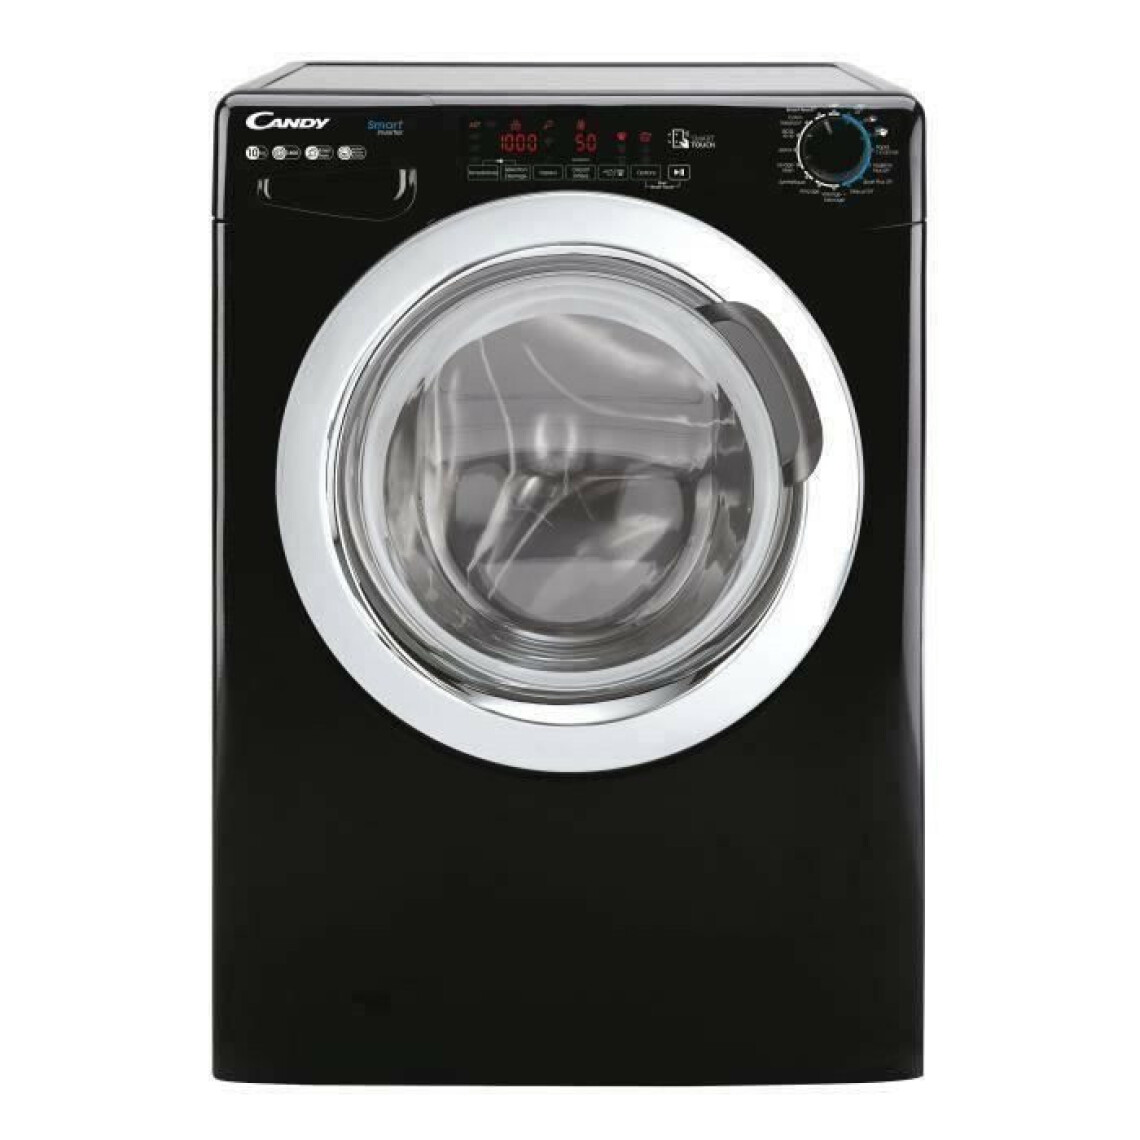 Candy - Lave linge Frontal CSS1410TWMCBE-47 - Lave-linge